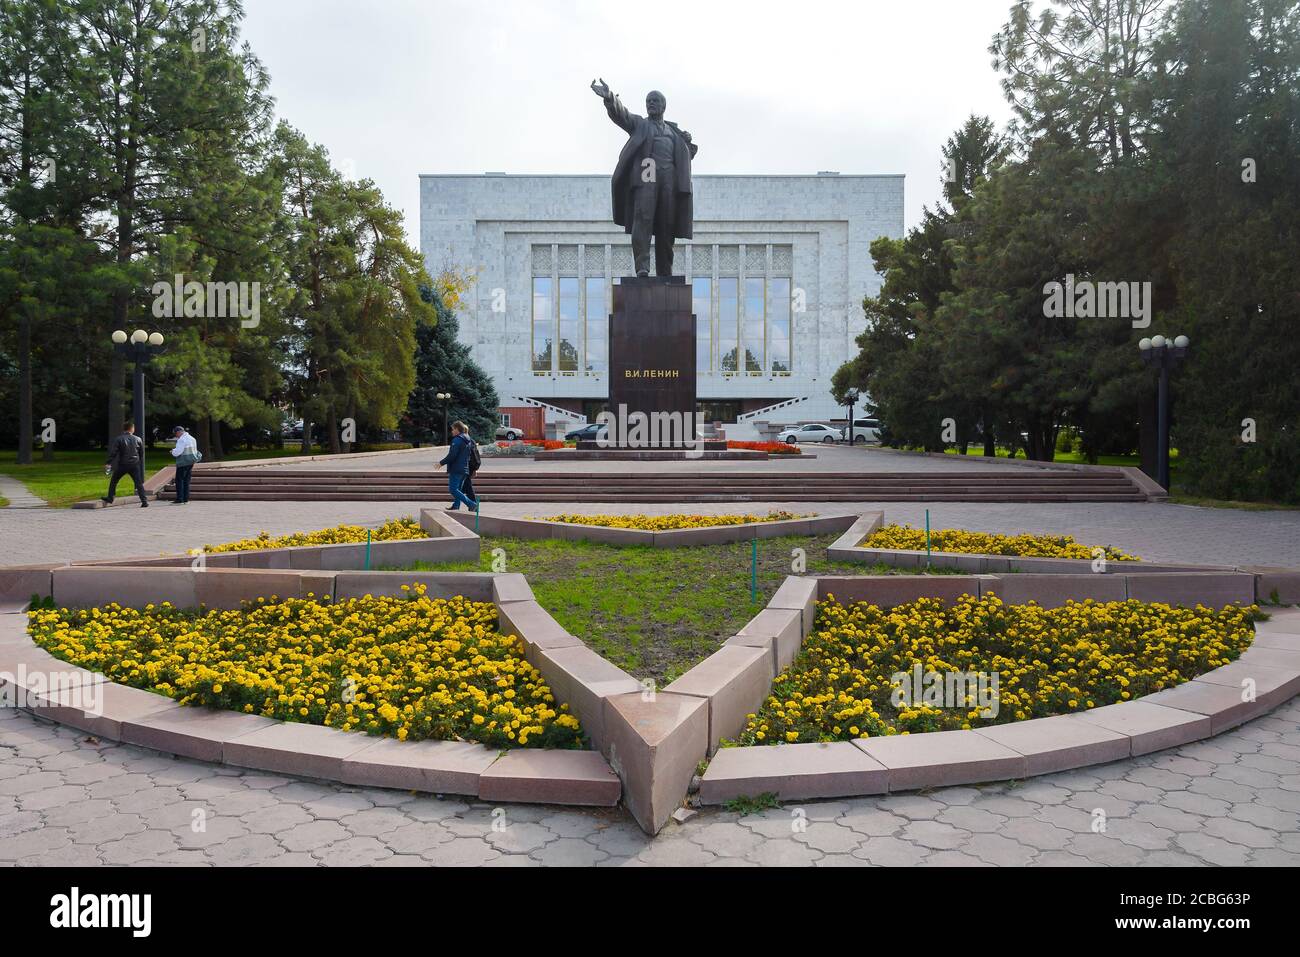 Vladimir Lenin statue moved to the back of the National Museum in  Bishkek, Kyrgyzstan. Vladimir Lenin monument with flowers around. Stock Photo